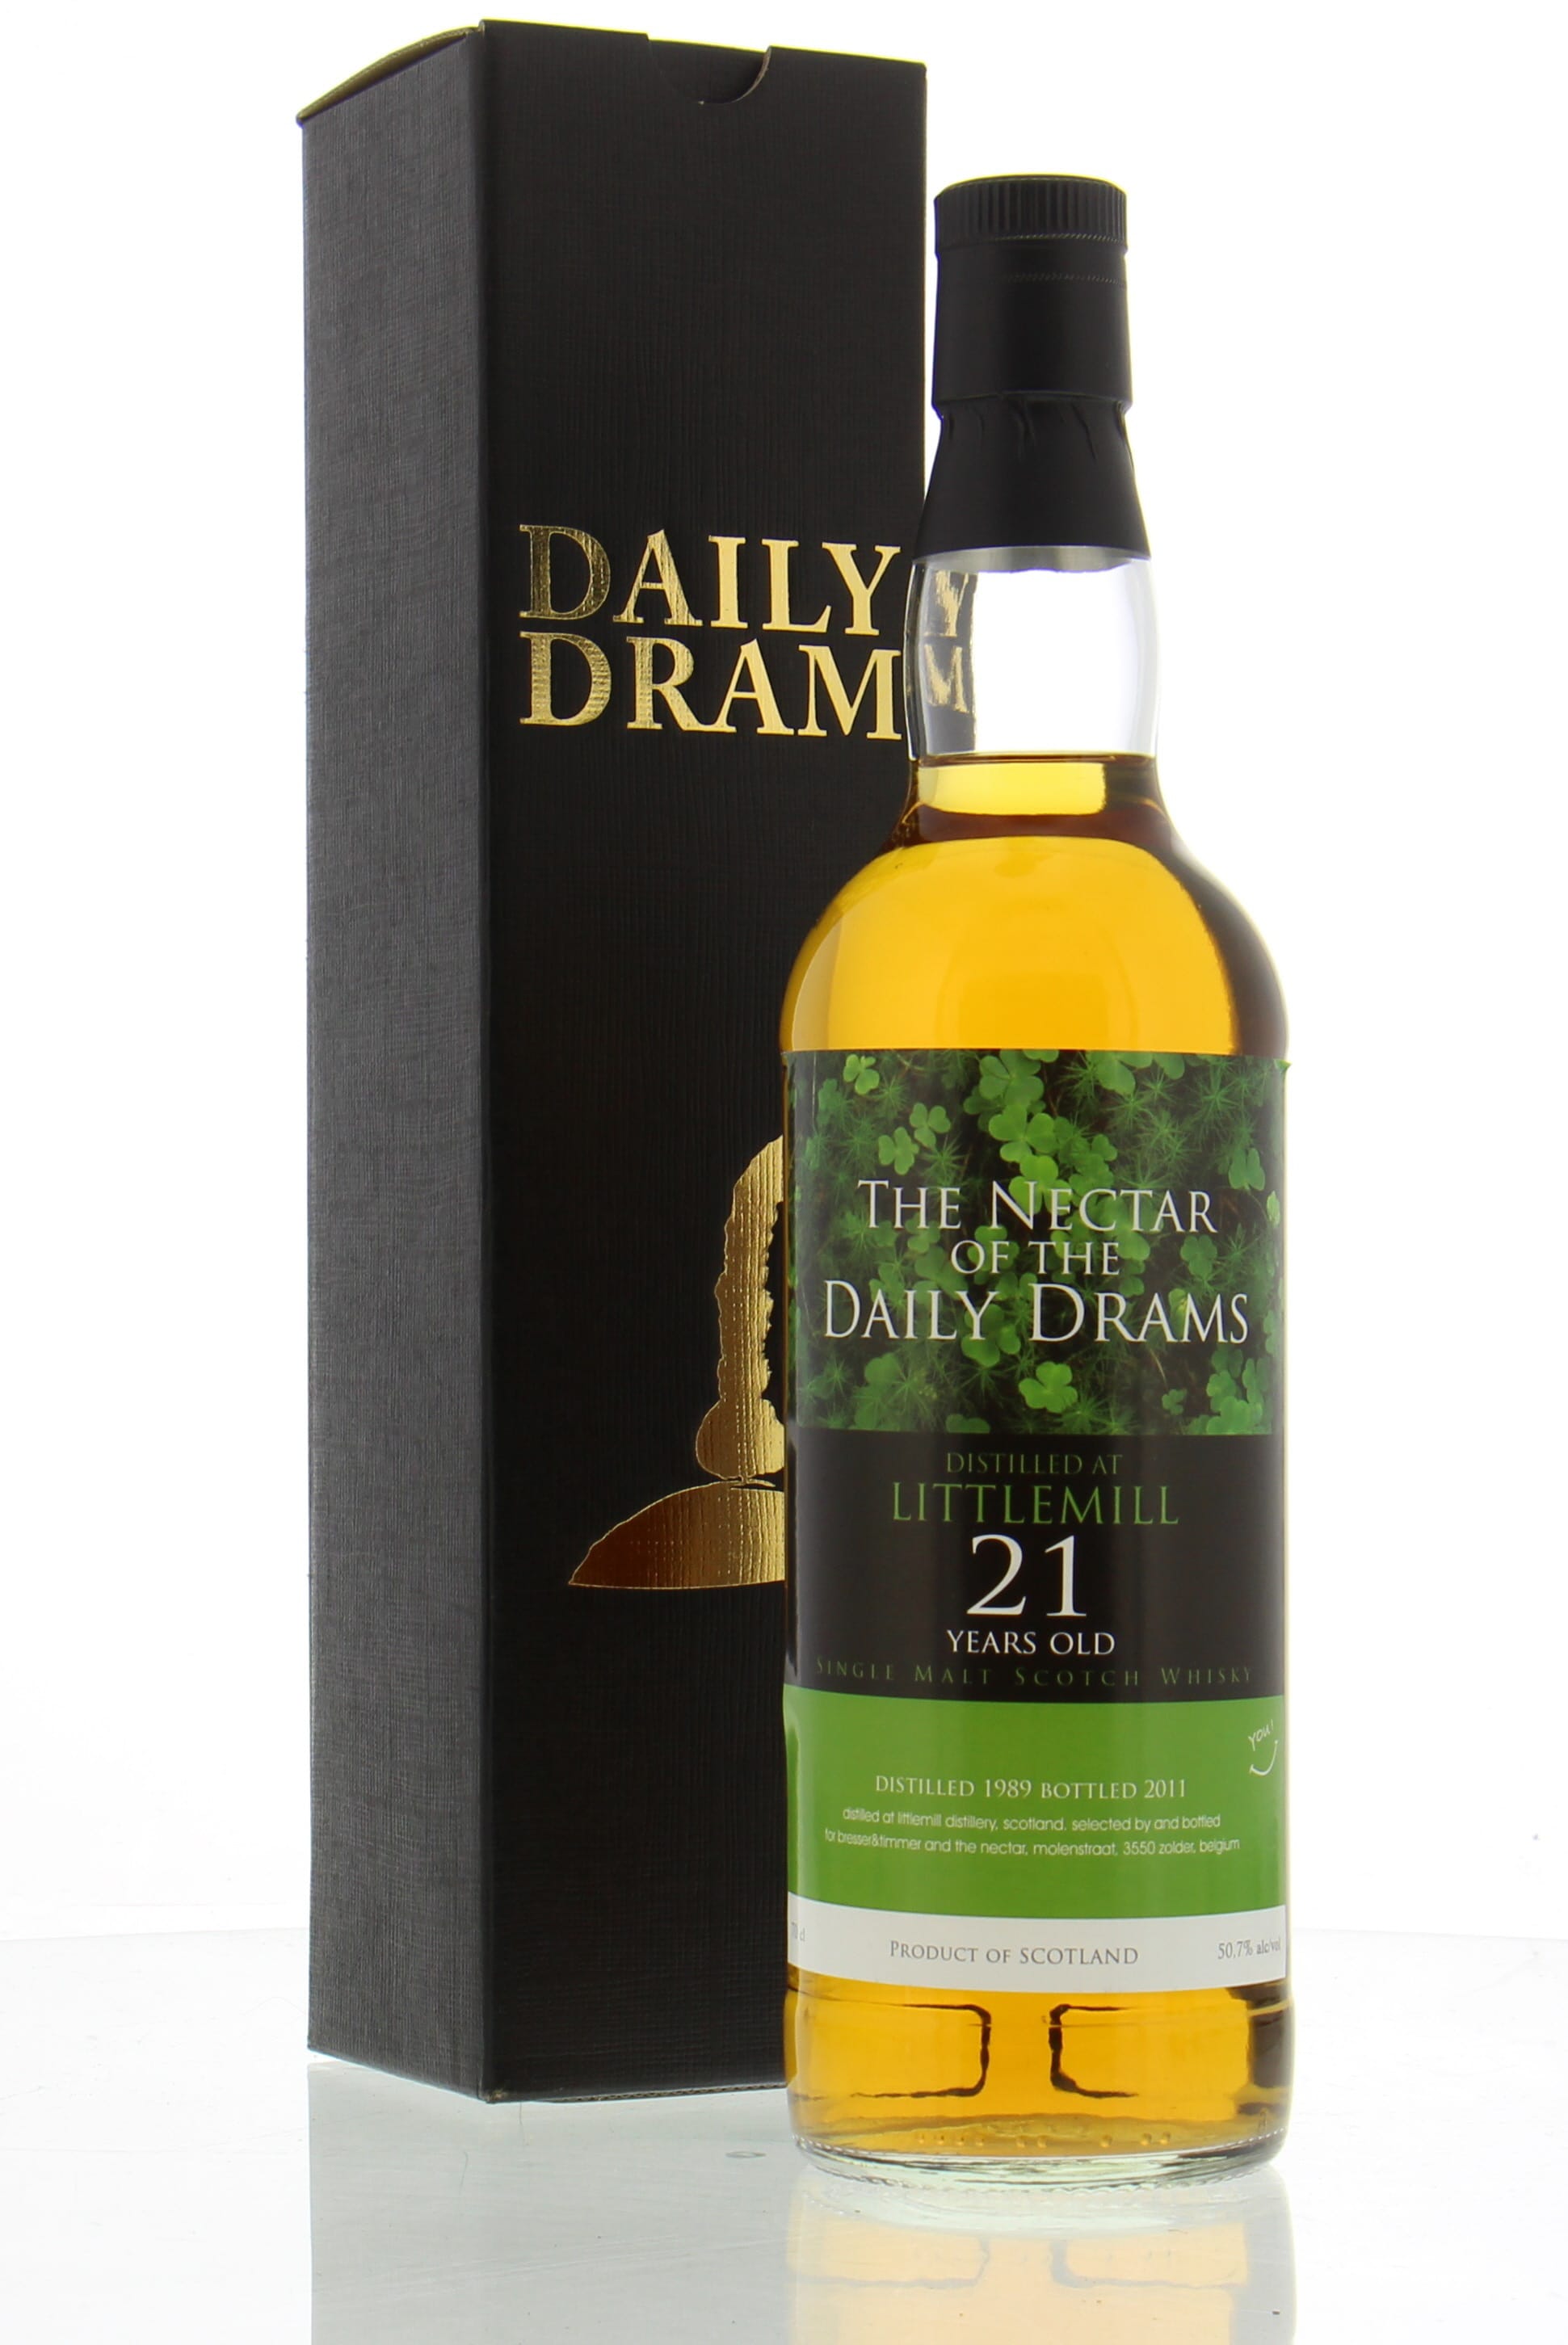 Littlemill - 21 Years Old The Nectar of the Daily Drams 50.7% 1990